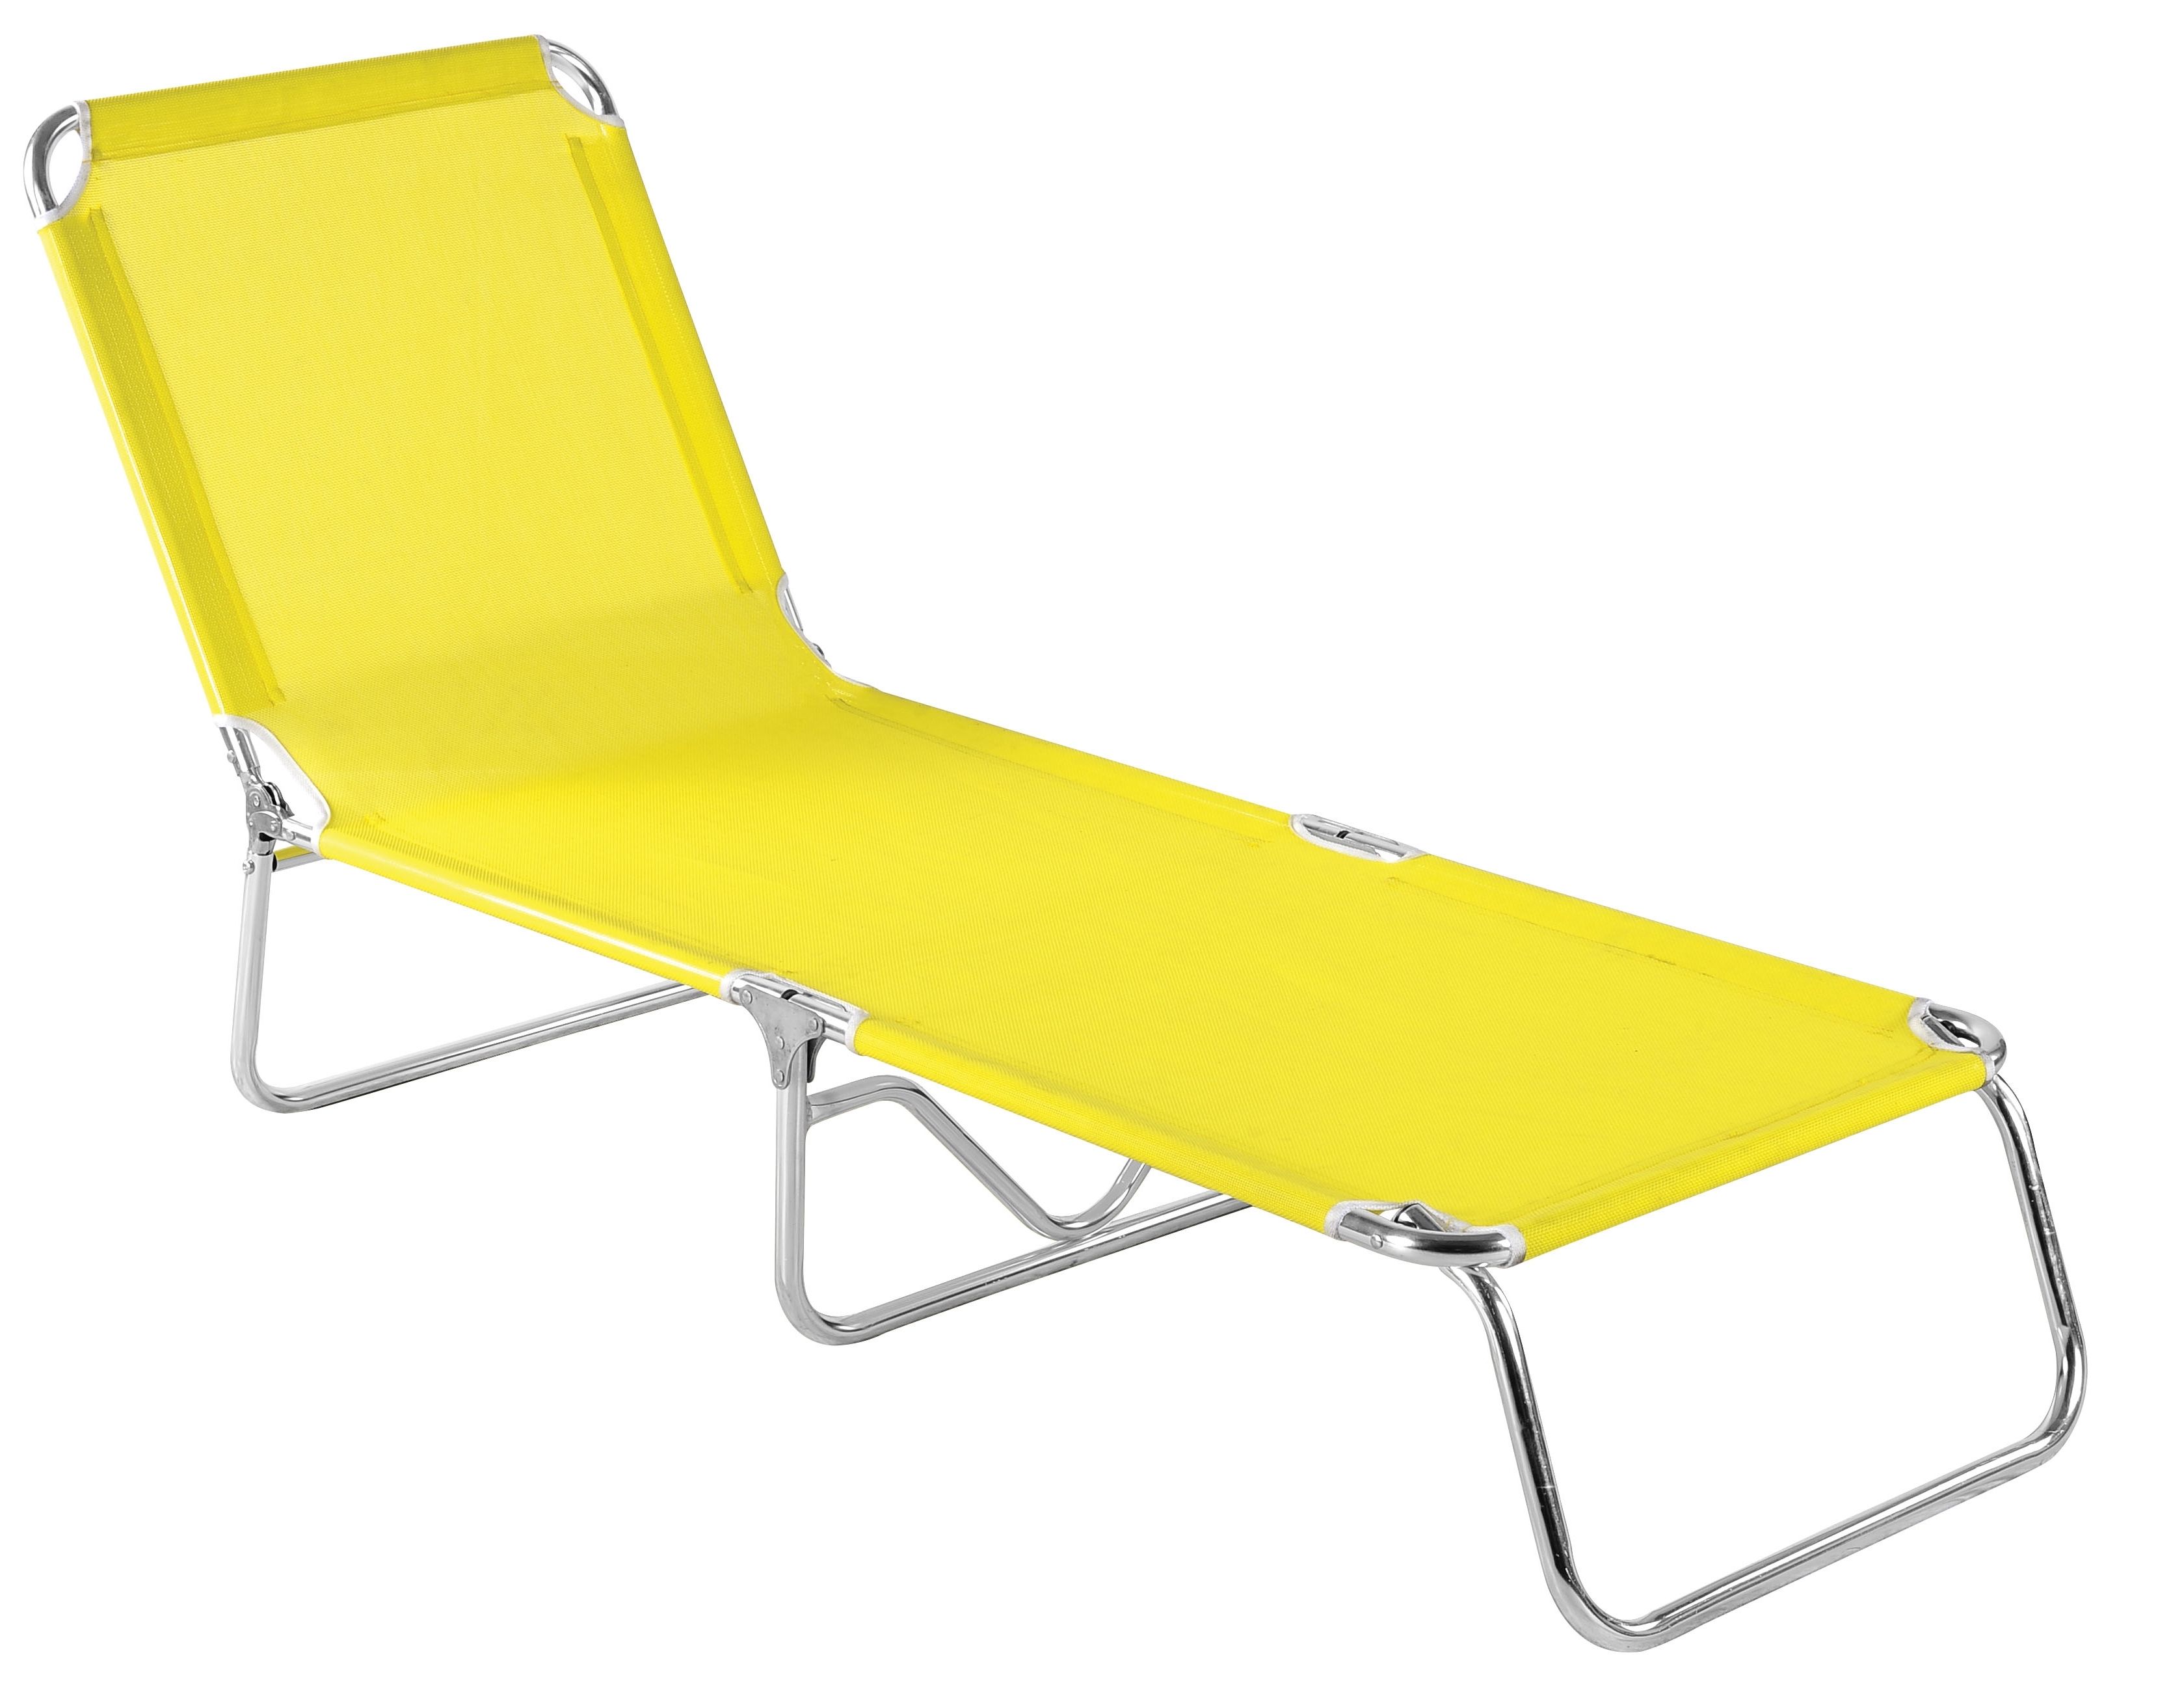 Favorite Chaise Lounge Sun Chairs Regarding Lounge Chair : Patio Lounge Chair Unique Articles With Plastic (View 1 of 15)